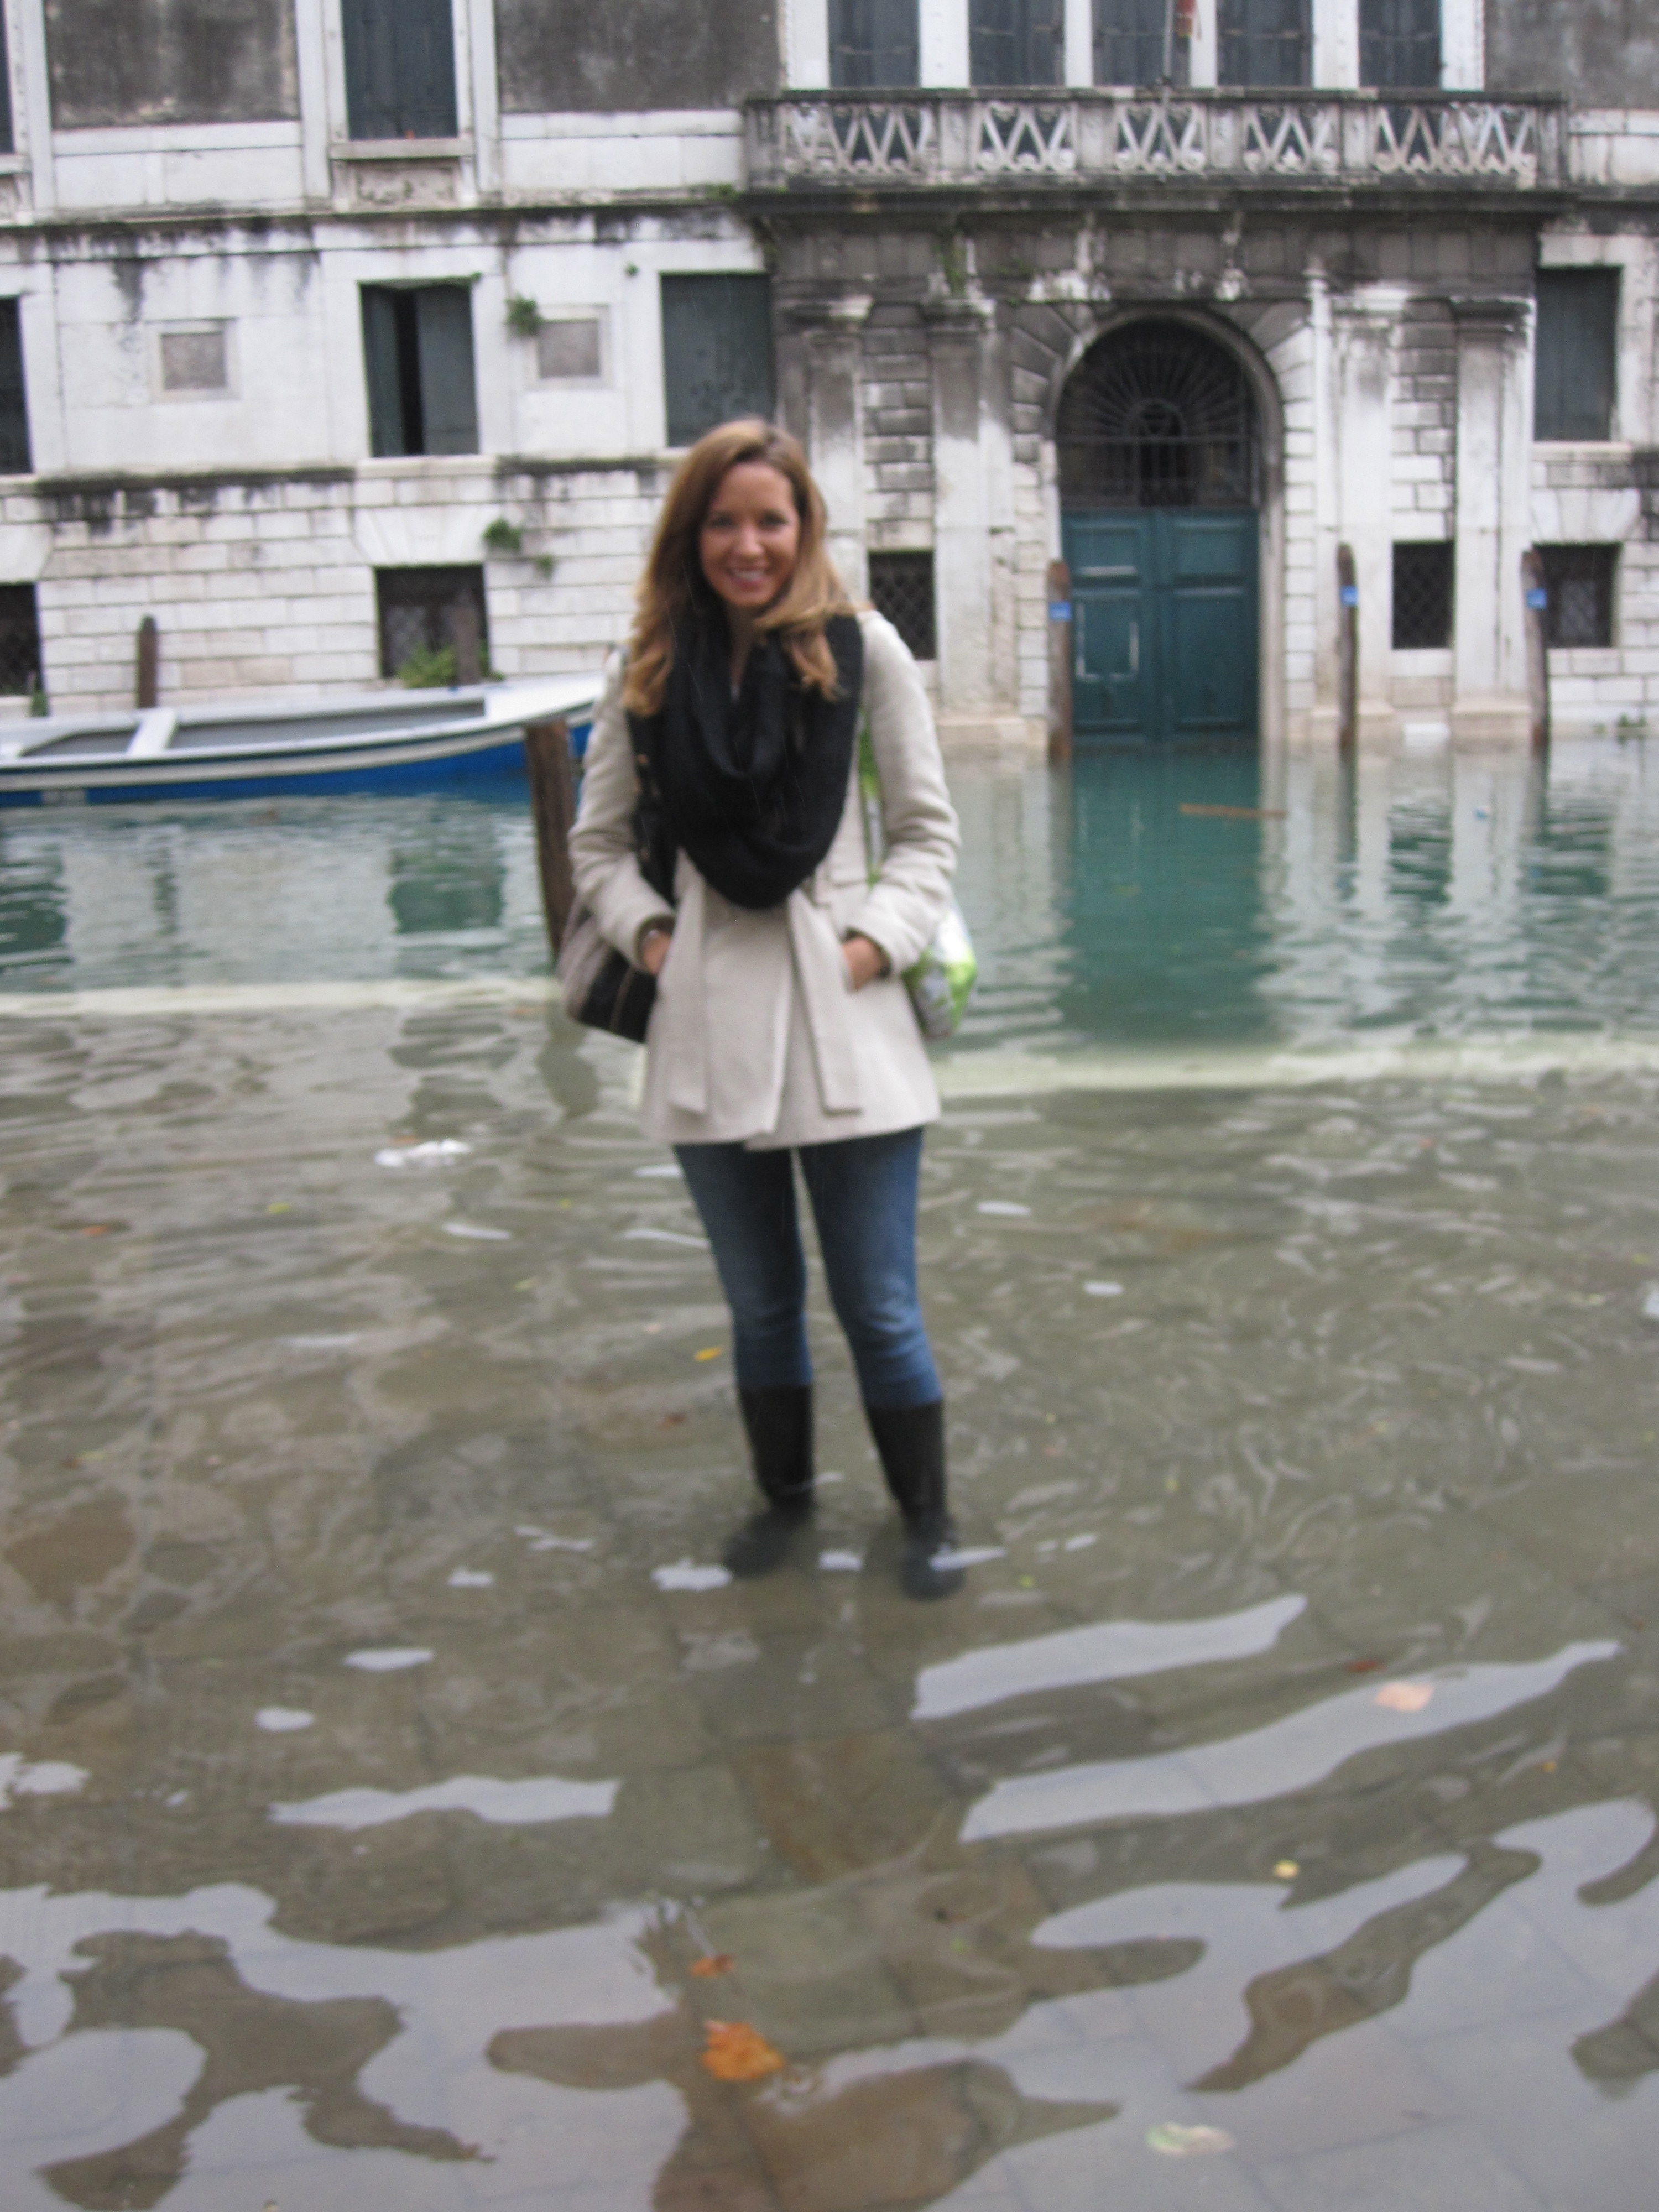 Flooded Venice Calls for Wellies